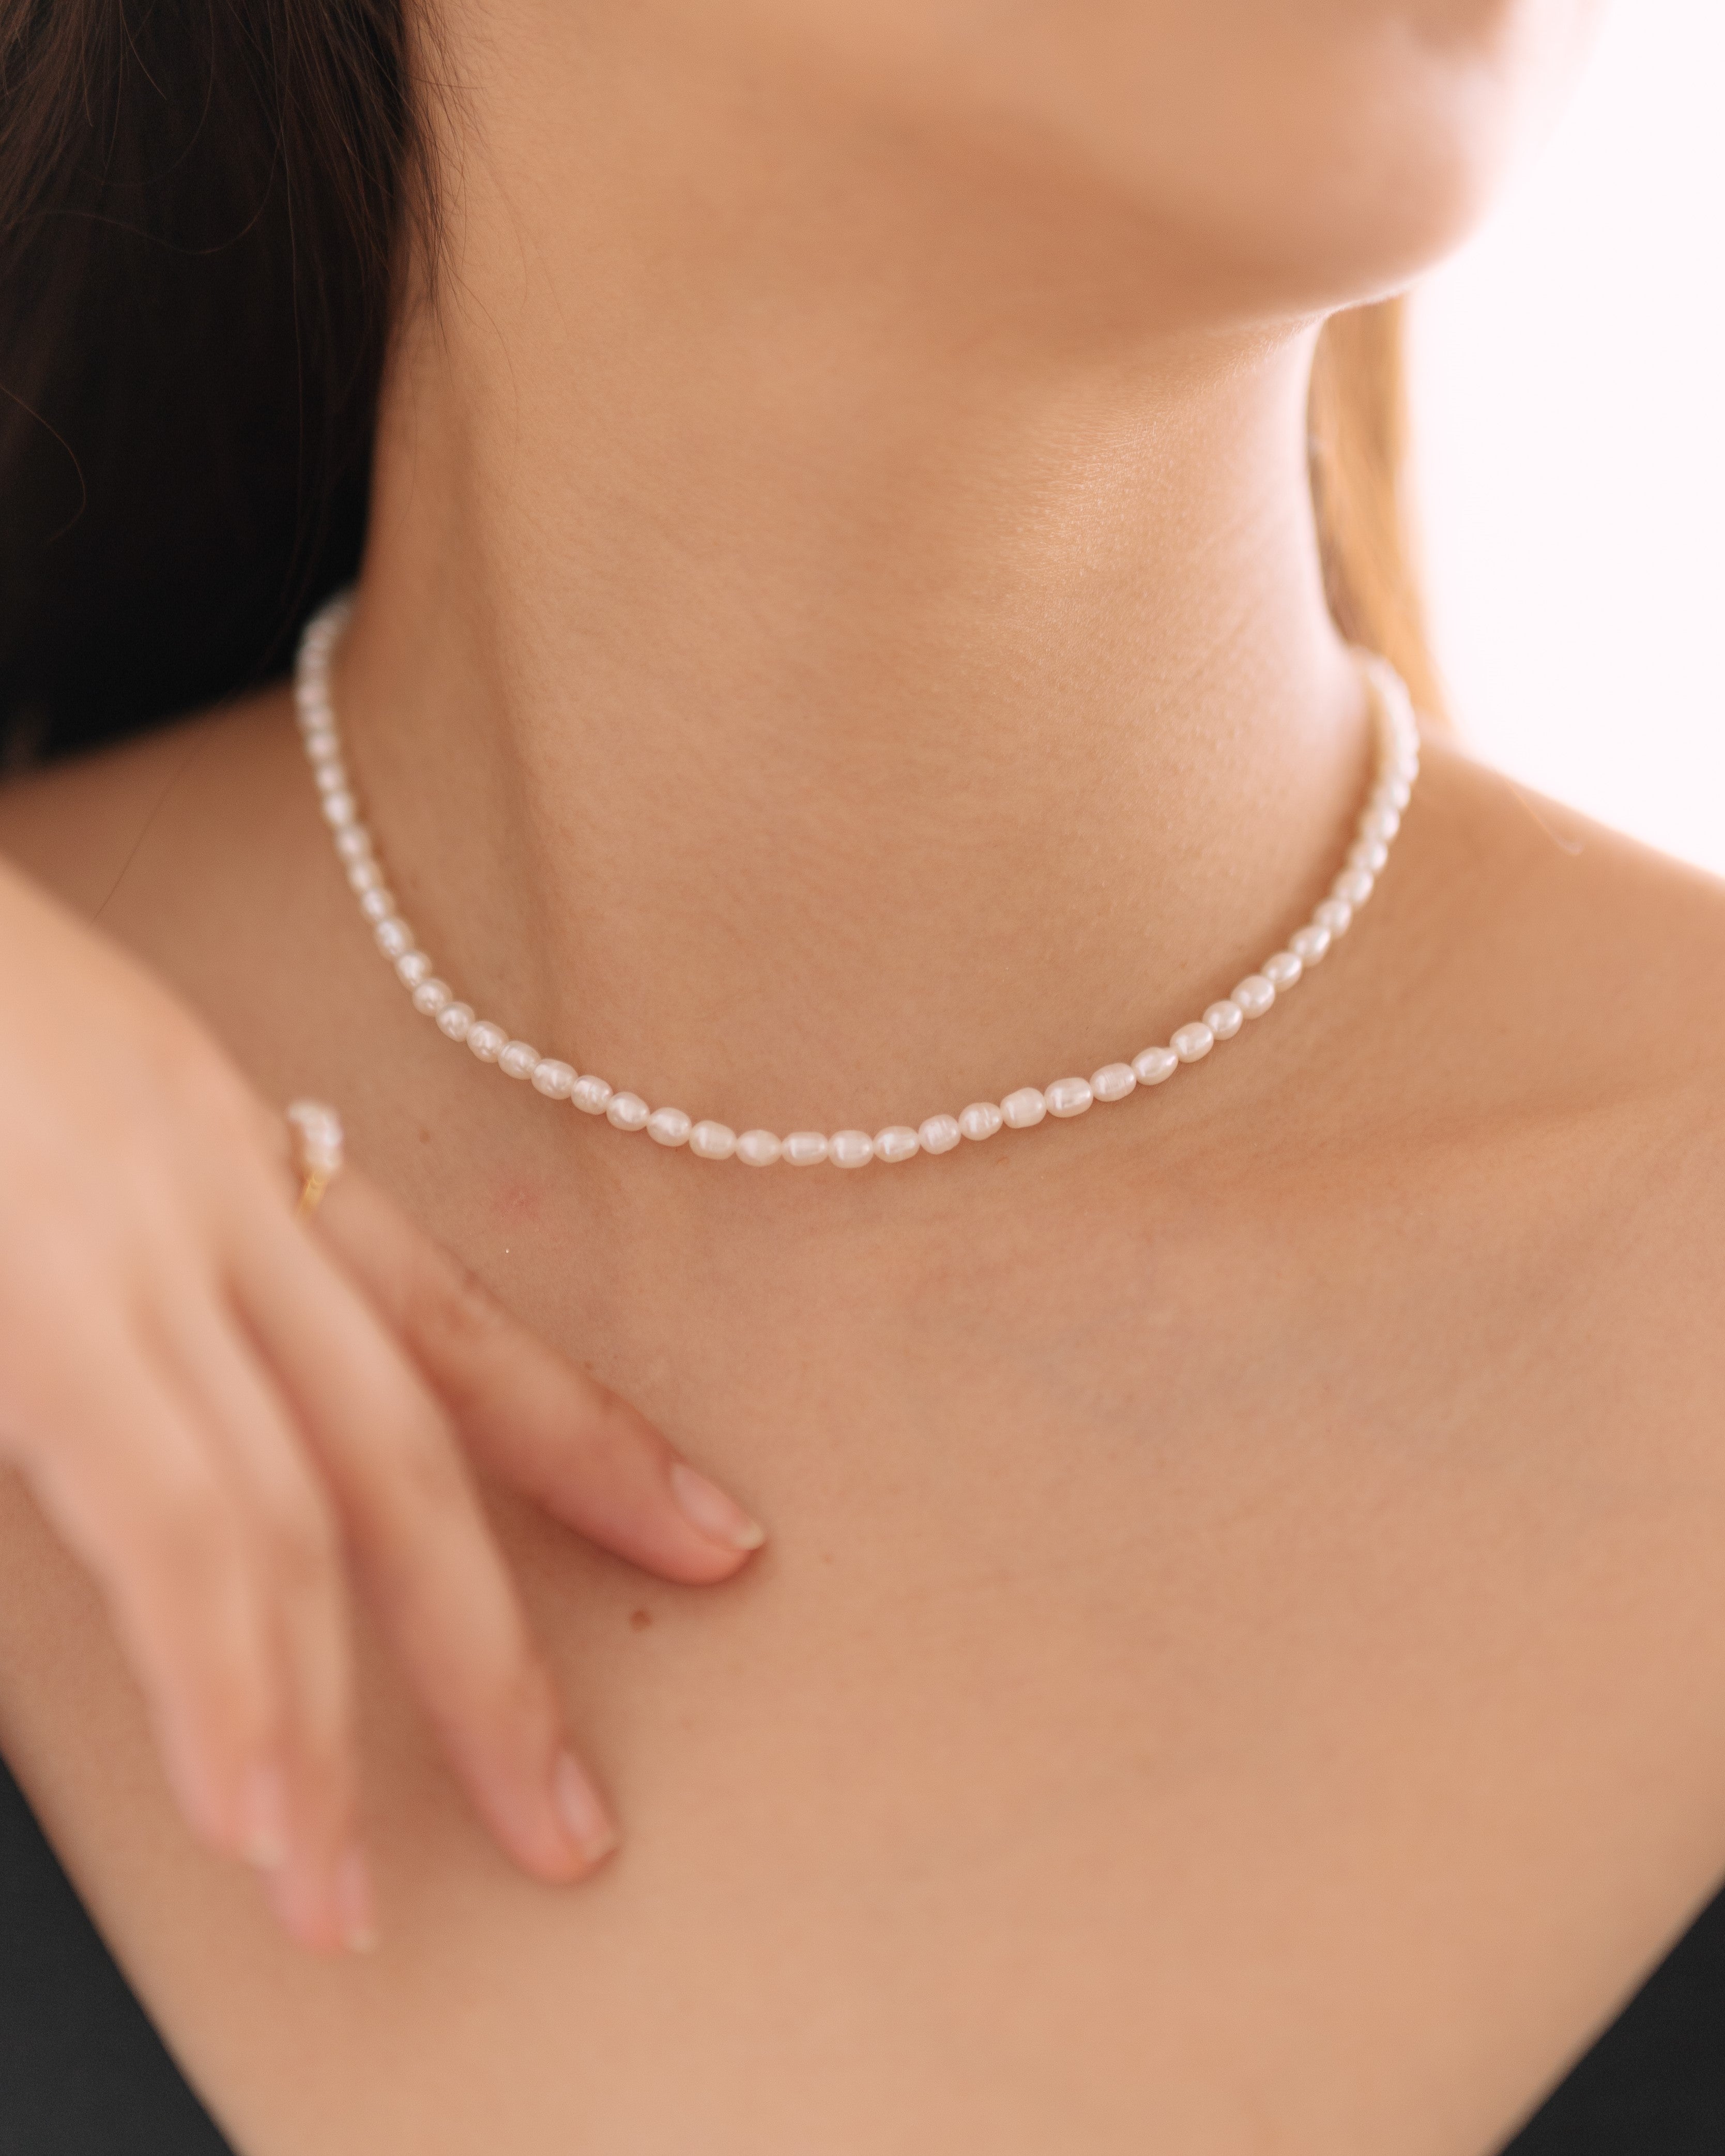 The pearl necklace